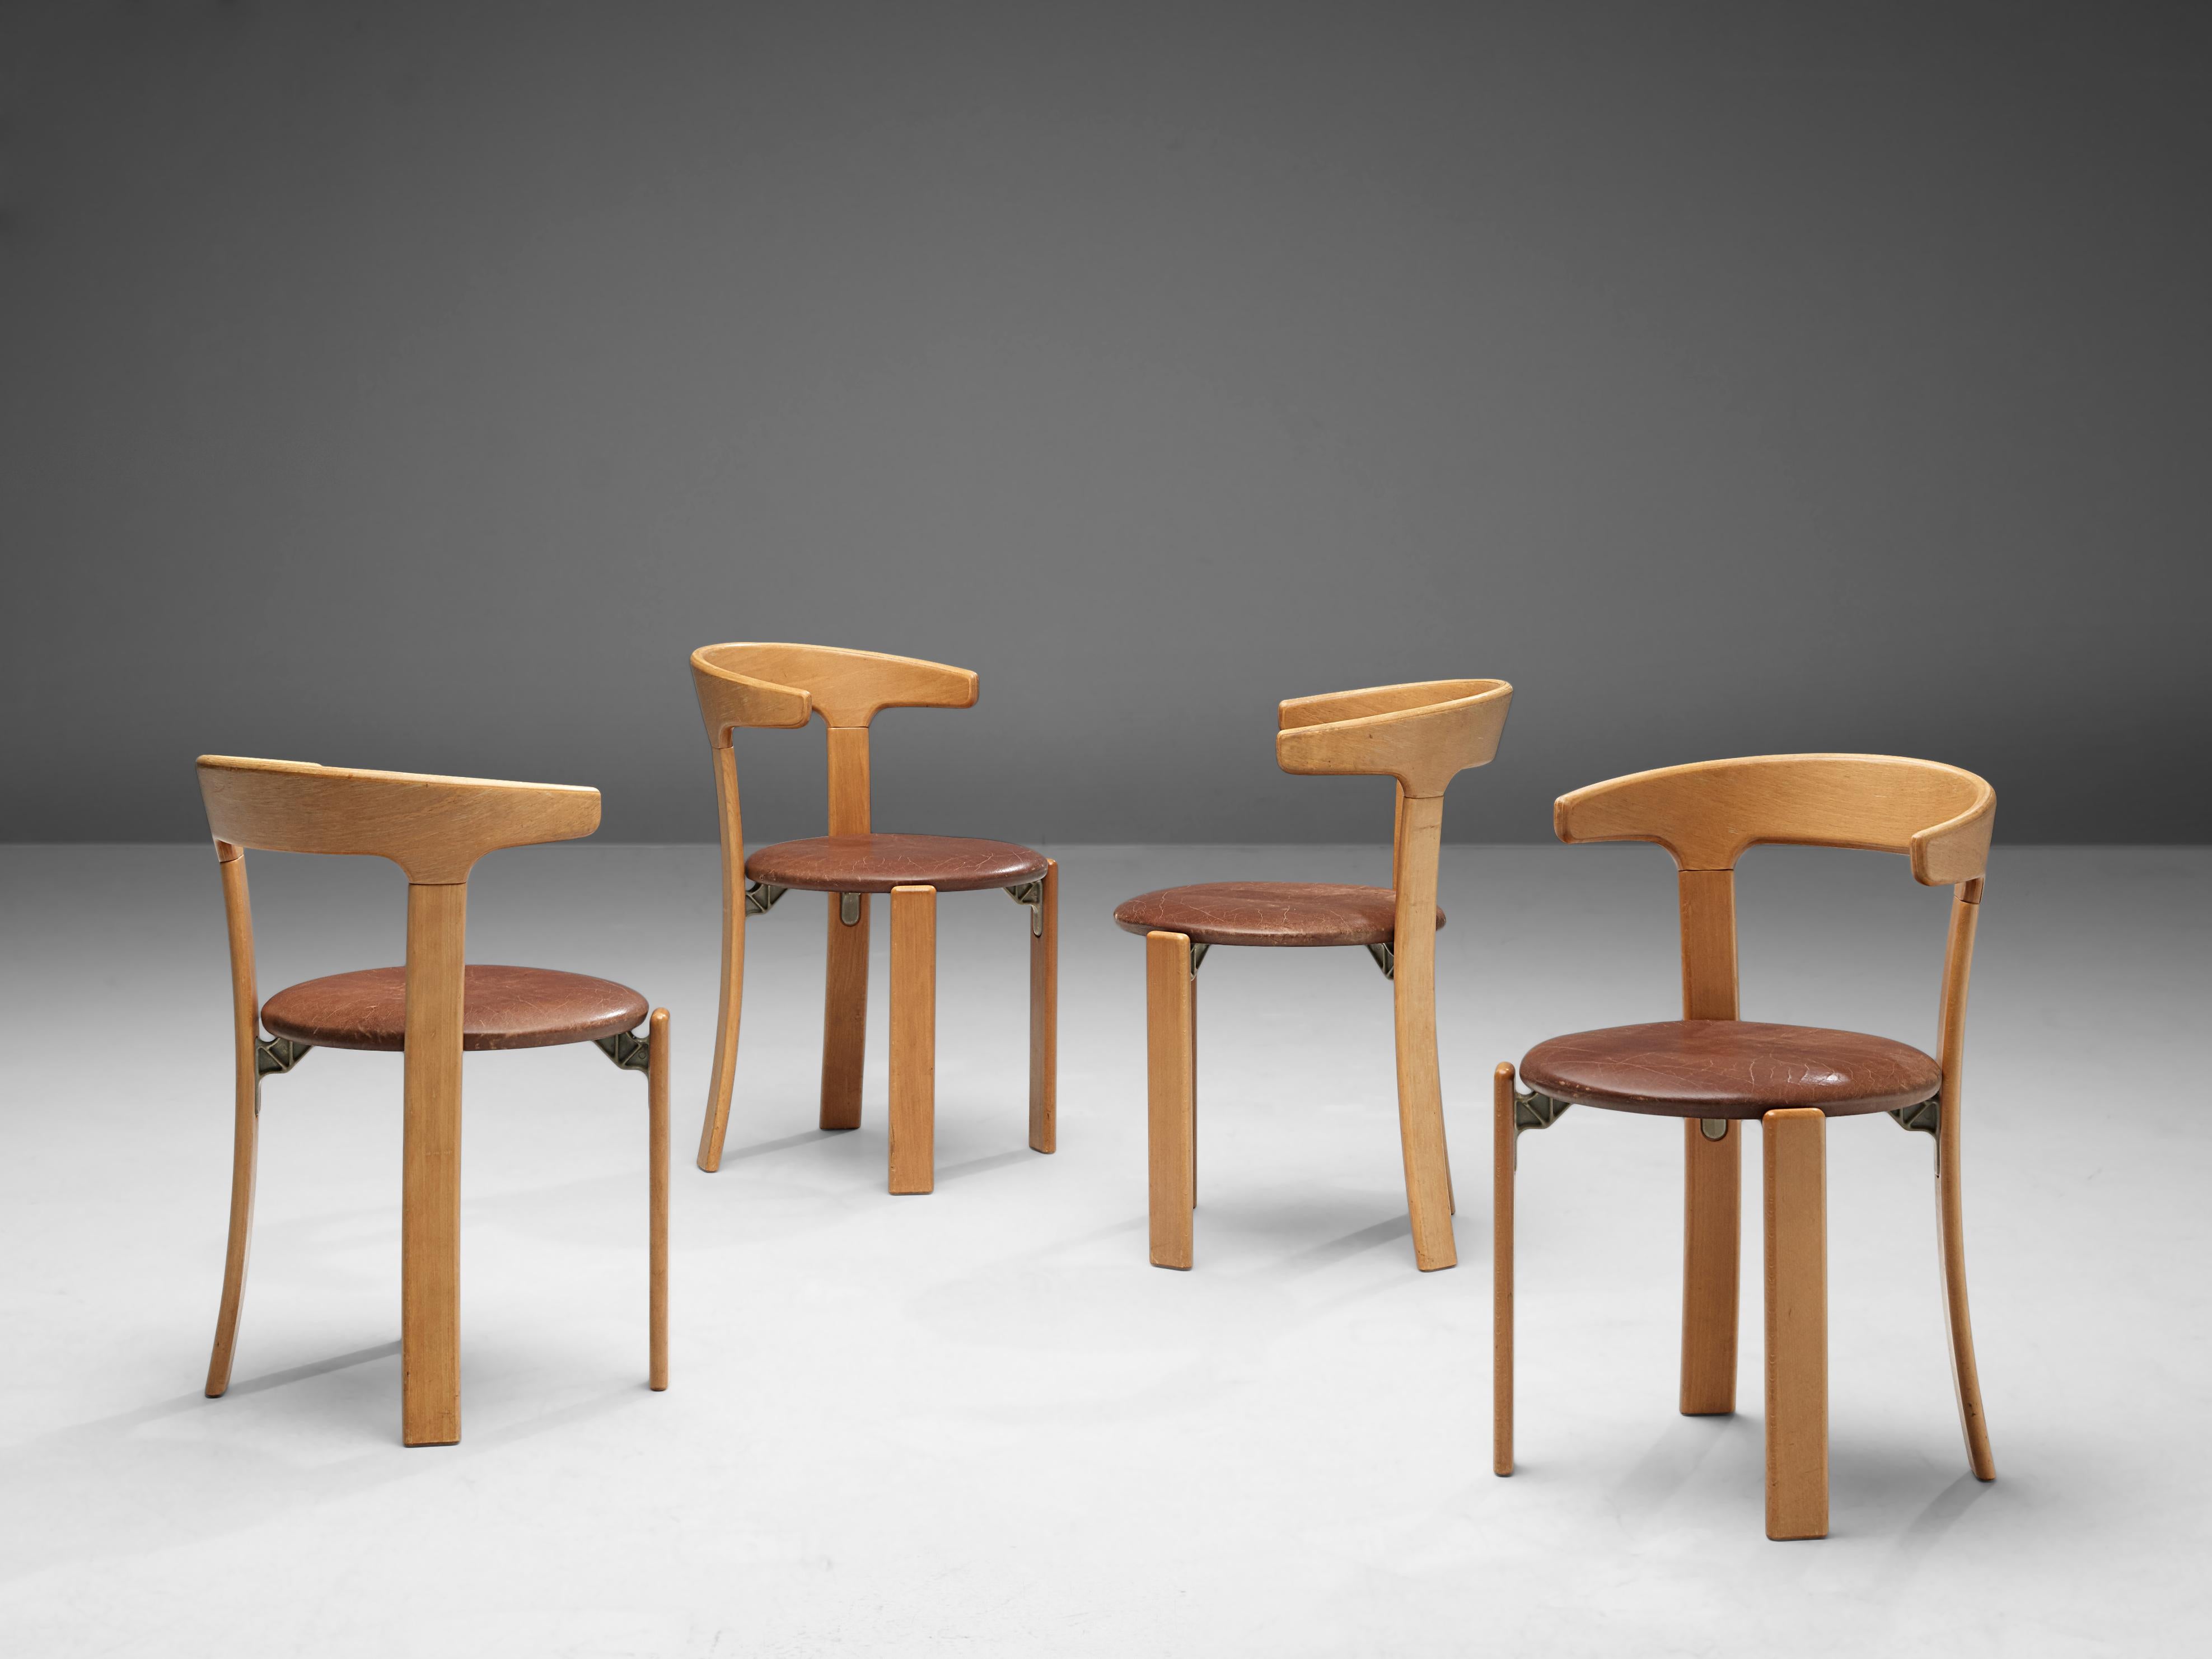 Bruno Rey for Kush & Co, set of five dining chairs, leather and beech, Switzerland, 1971.

This set of dining chairs is designed by Bruno Rey in Switzerland in 1971 and is very comfortable. The chairs are also stackable and were produced in